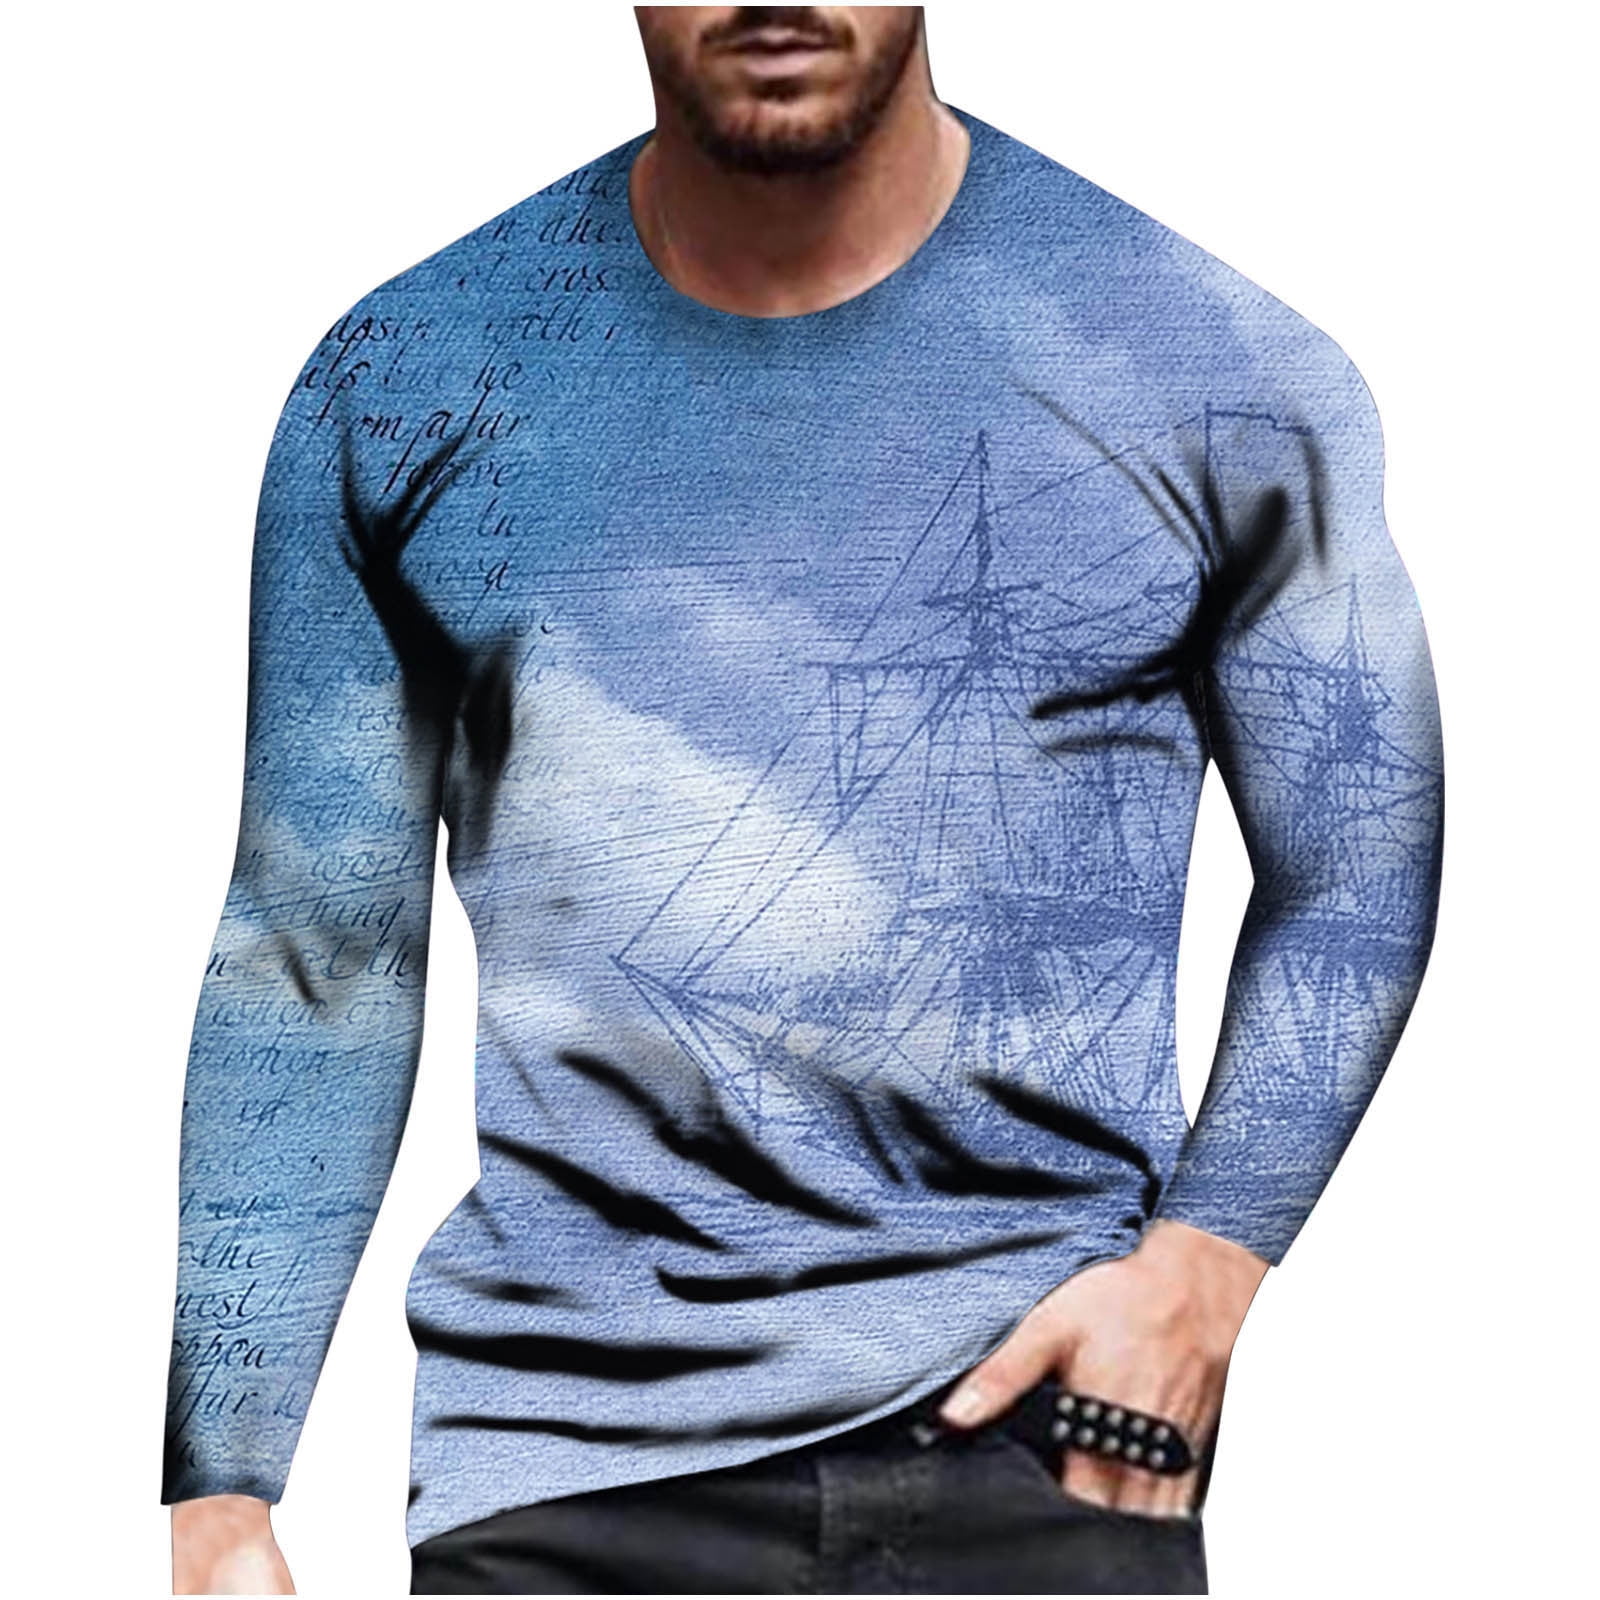 Men Long Sleeve 3D Print Crew Neck T-shirt Tops Casual Fashion Muscle Tee Blouse